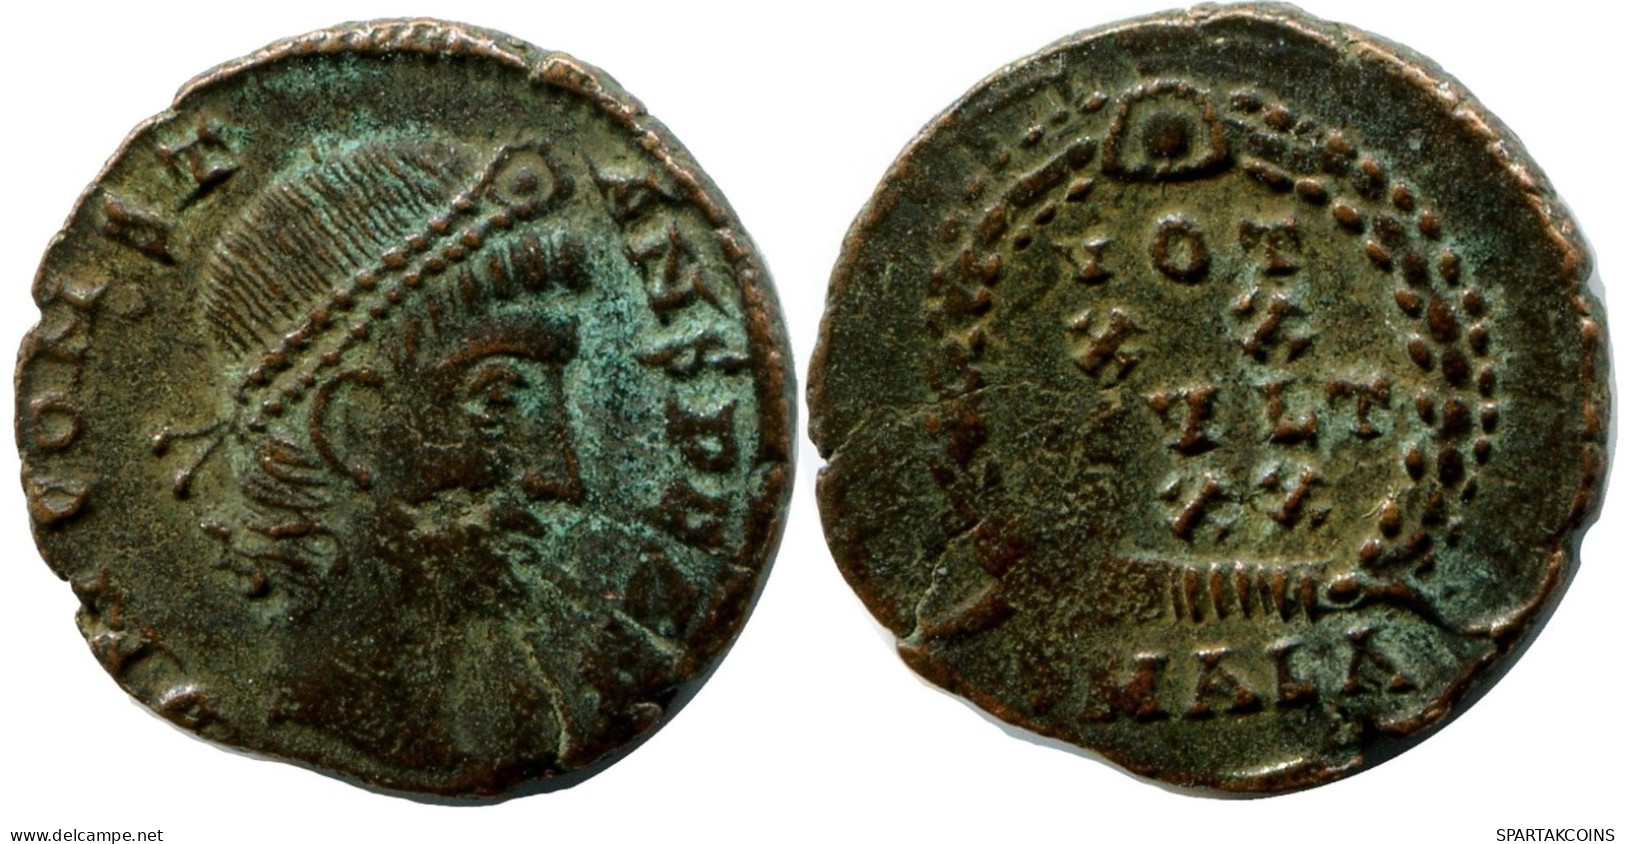 CONSTANS MINTED IN ALEKSANDRIA FROM THE ROYAL ONTARIO MUSEUM #ANC11469.14.U.A - The Christian Empire (307 AD To 363 AD)